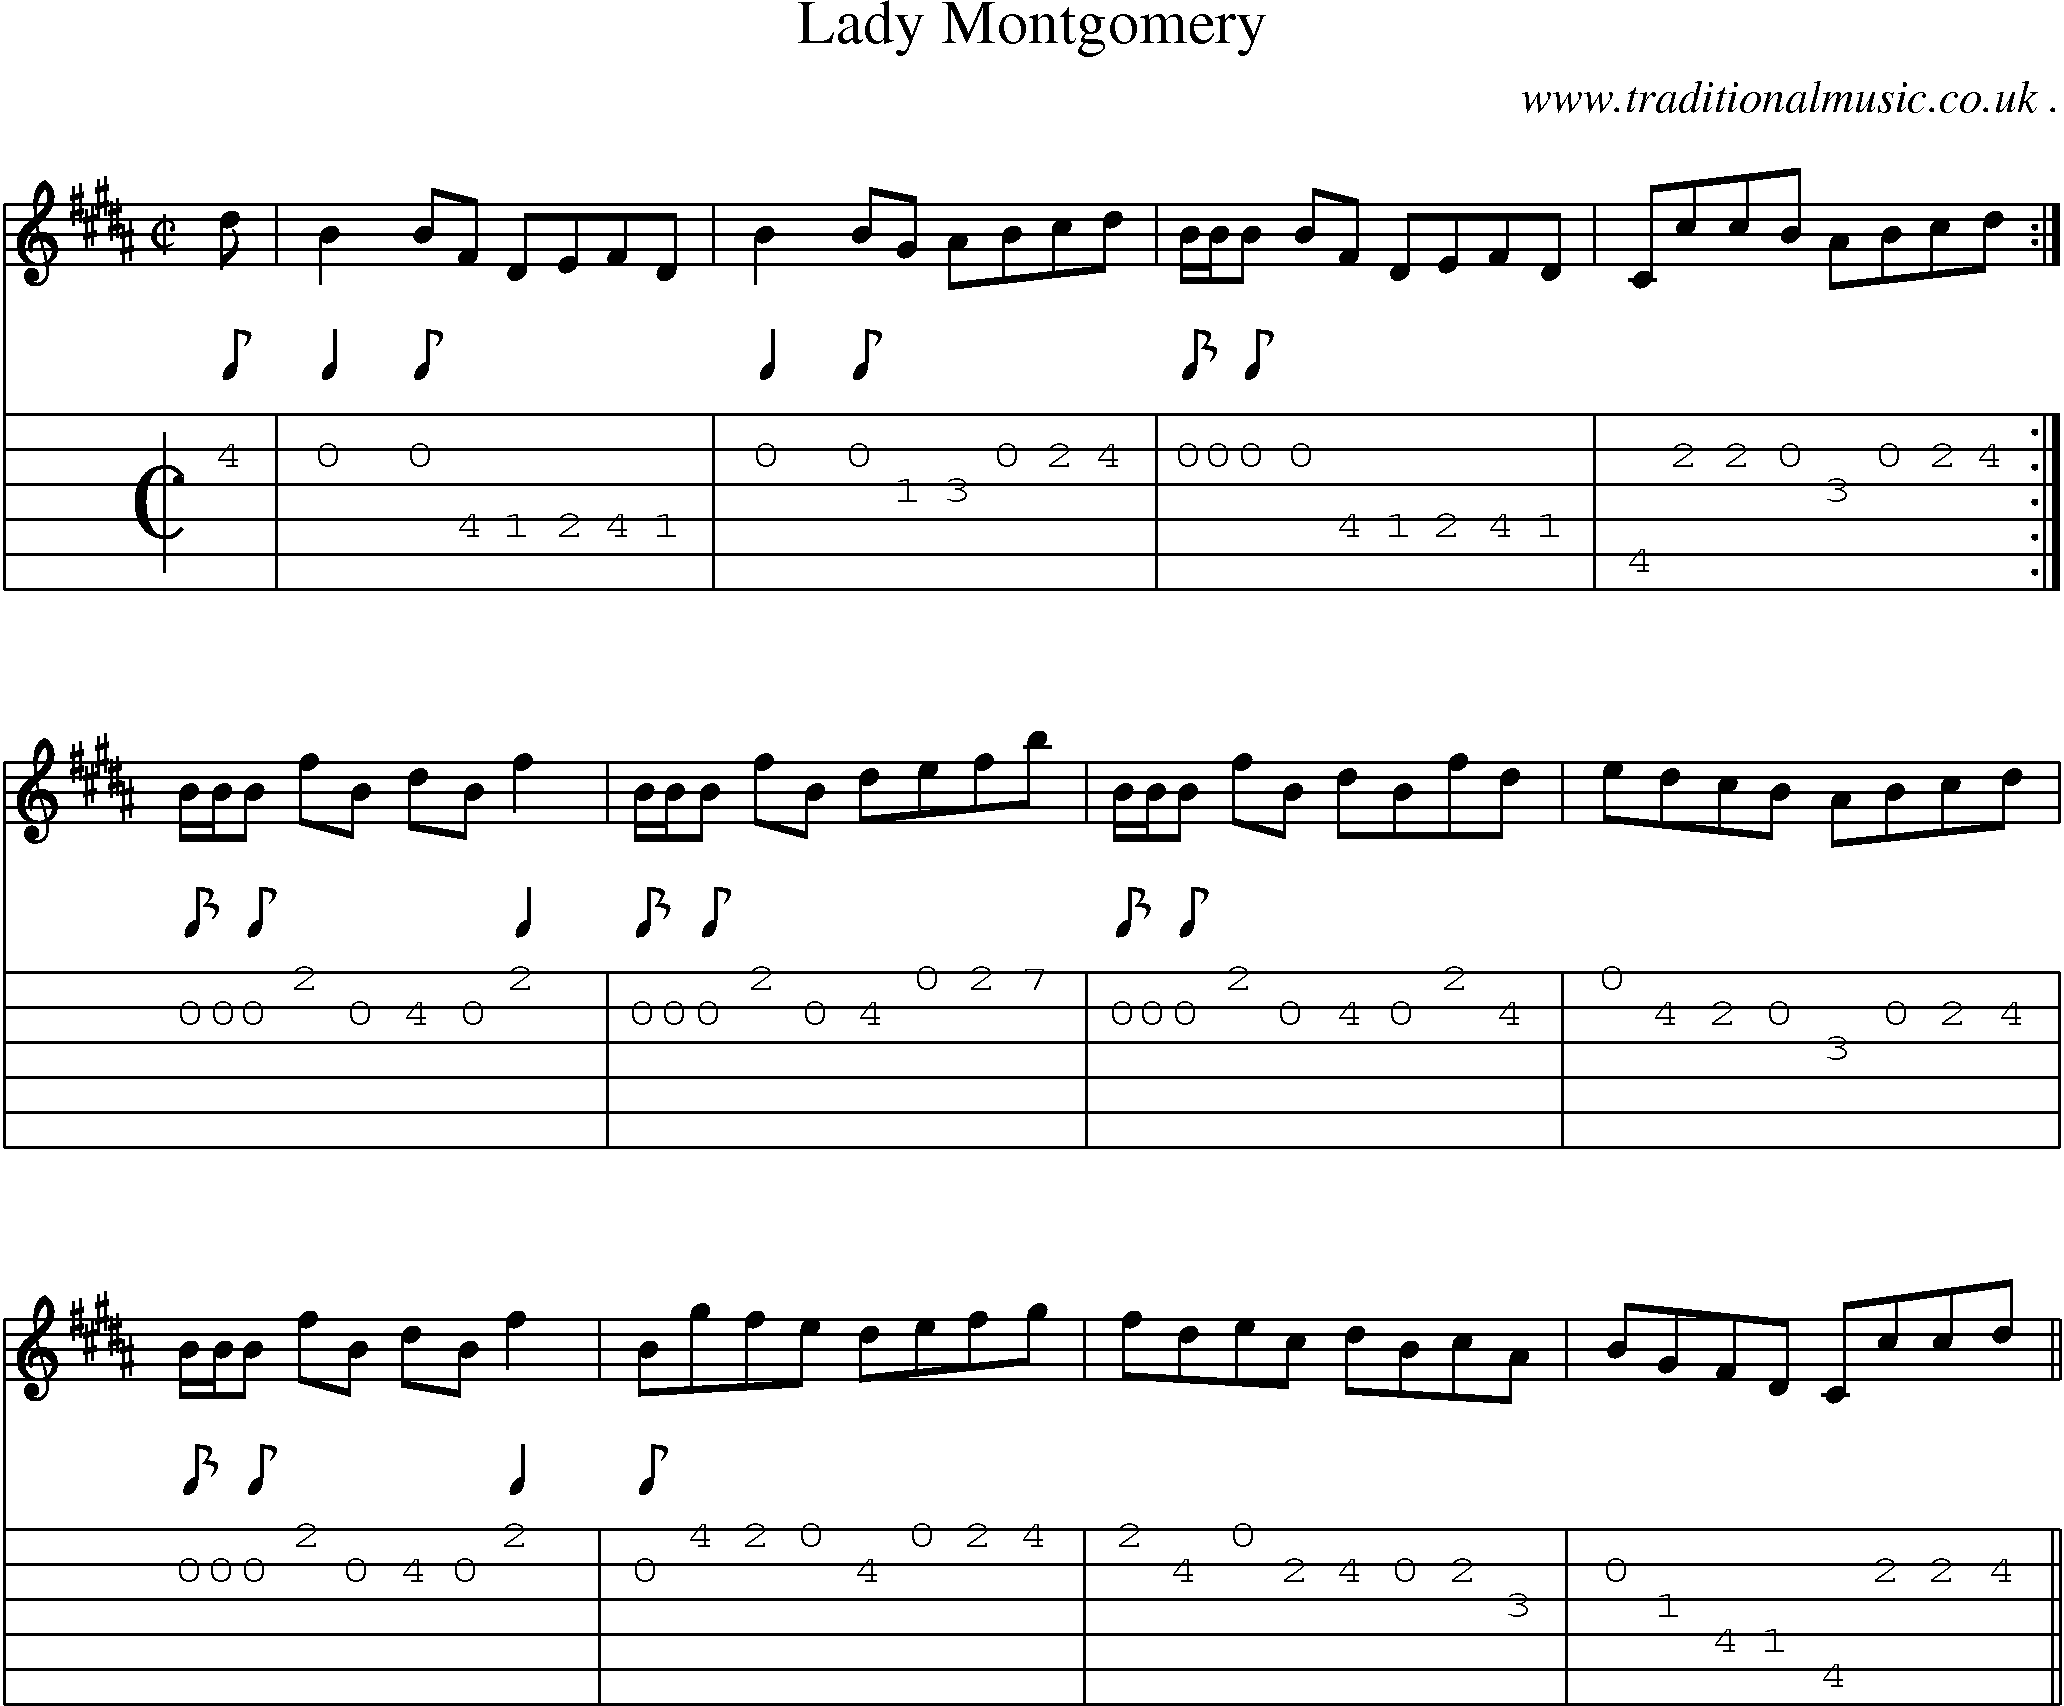 Sheet-music  score, Chords and Guitar Tabs for Lady Montgomery